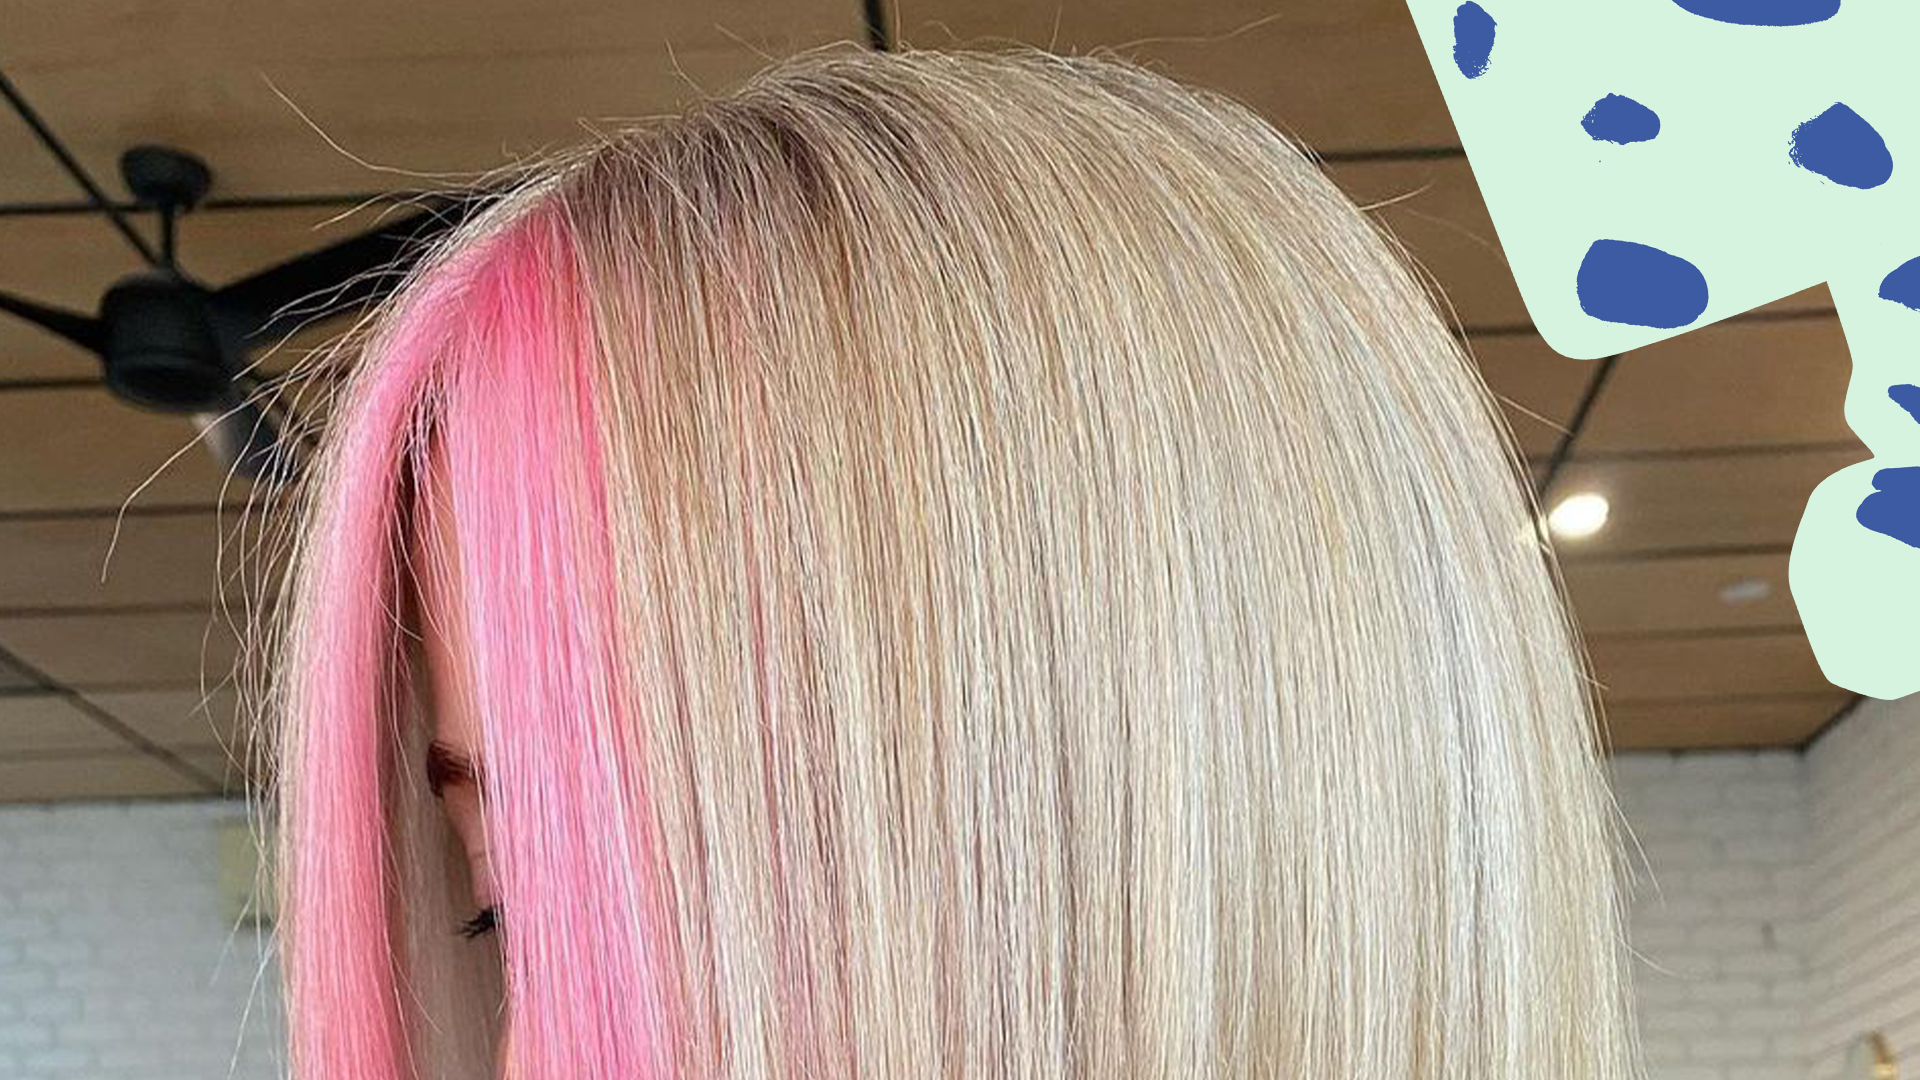 The 'paper-cut' bob is the chicest, sleekest choice for your summer hair cut